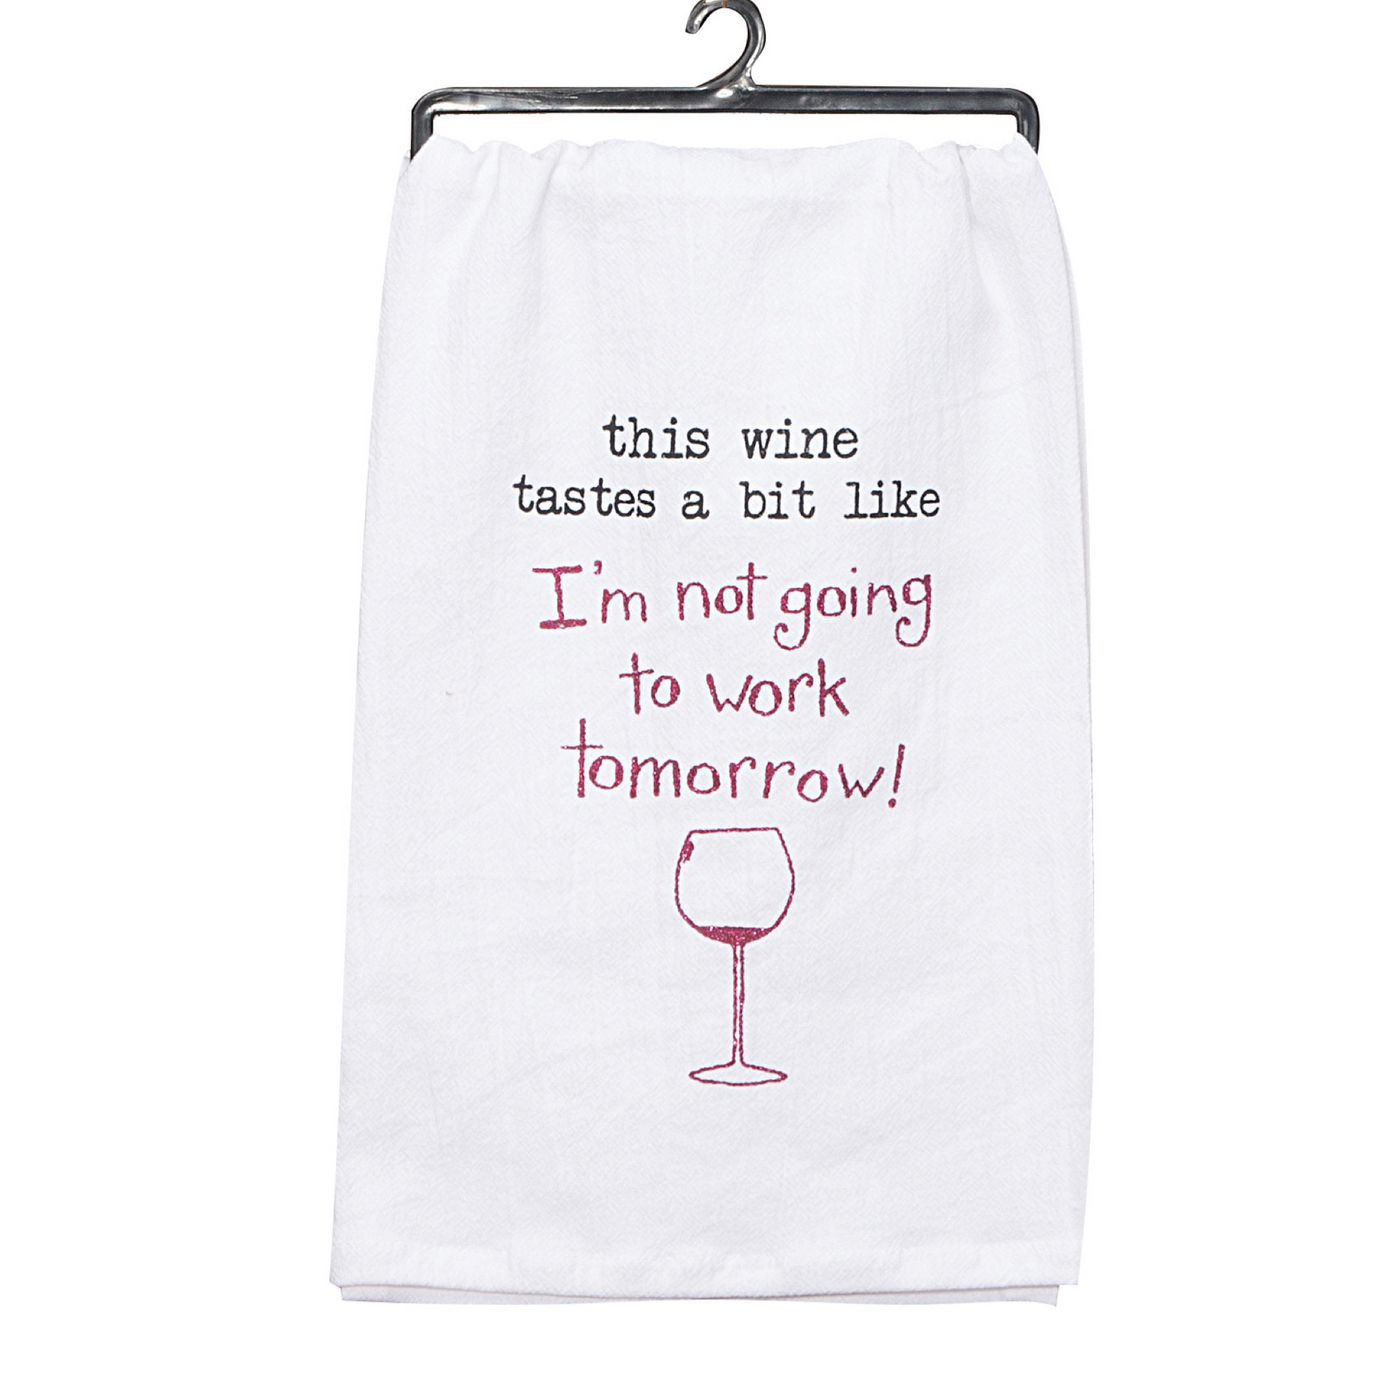 White flour sack towel reads this wine tastes a bit like I’m not going to work tomorrow with printed wine glass